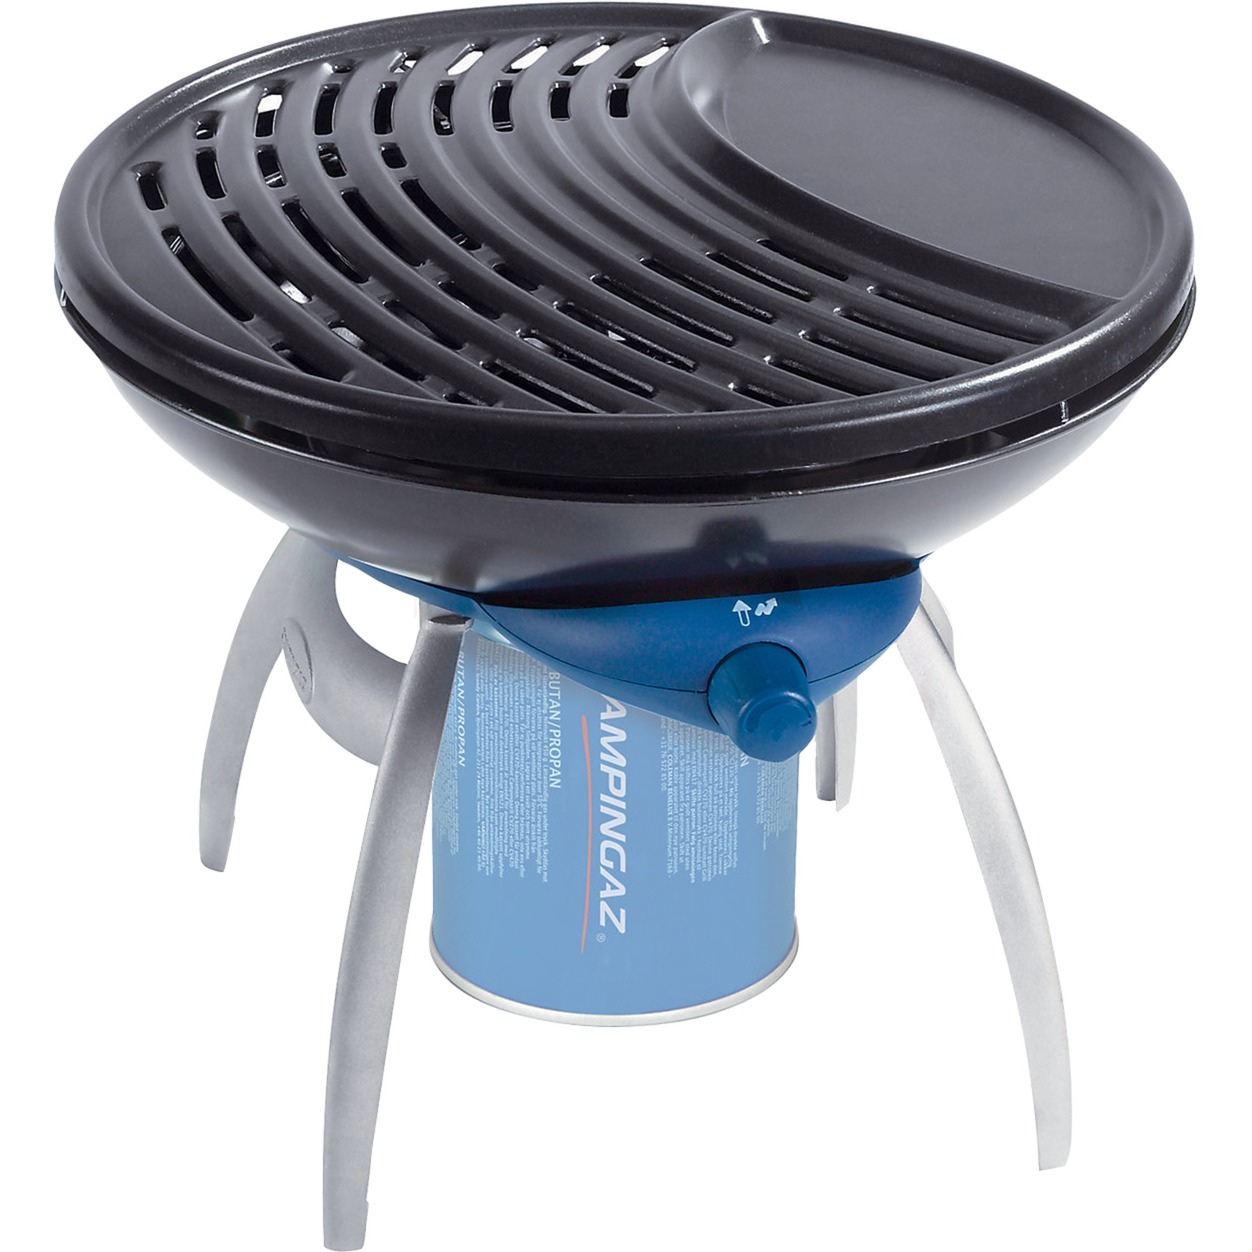 Party Grill, Gasgrill von Campingaz